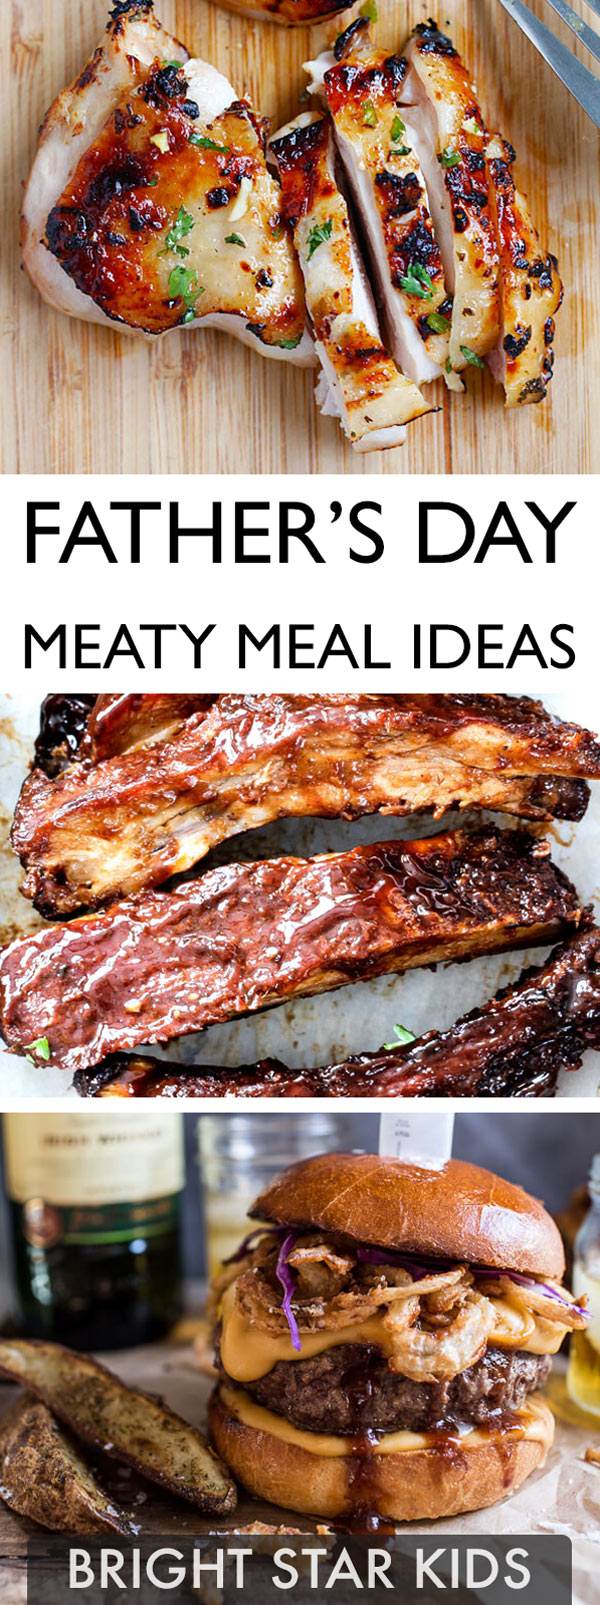 Father's Day Meal Ideas